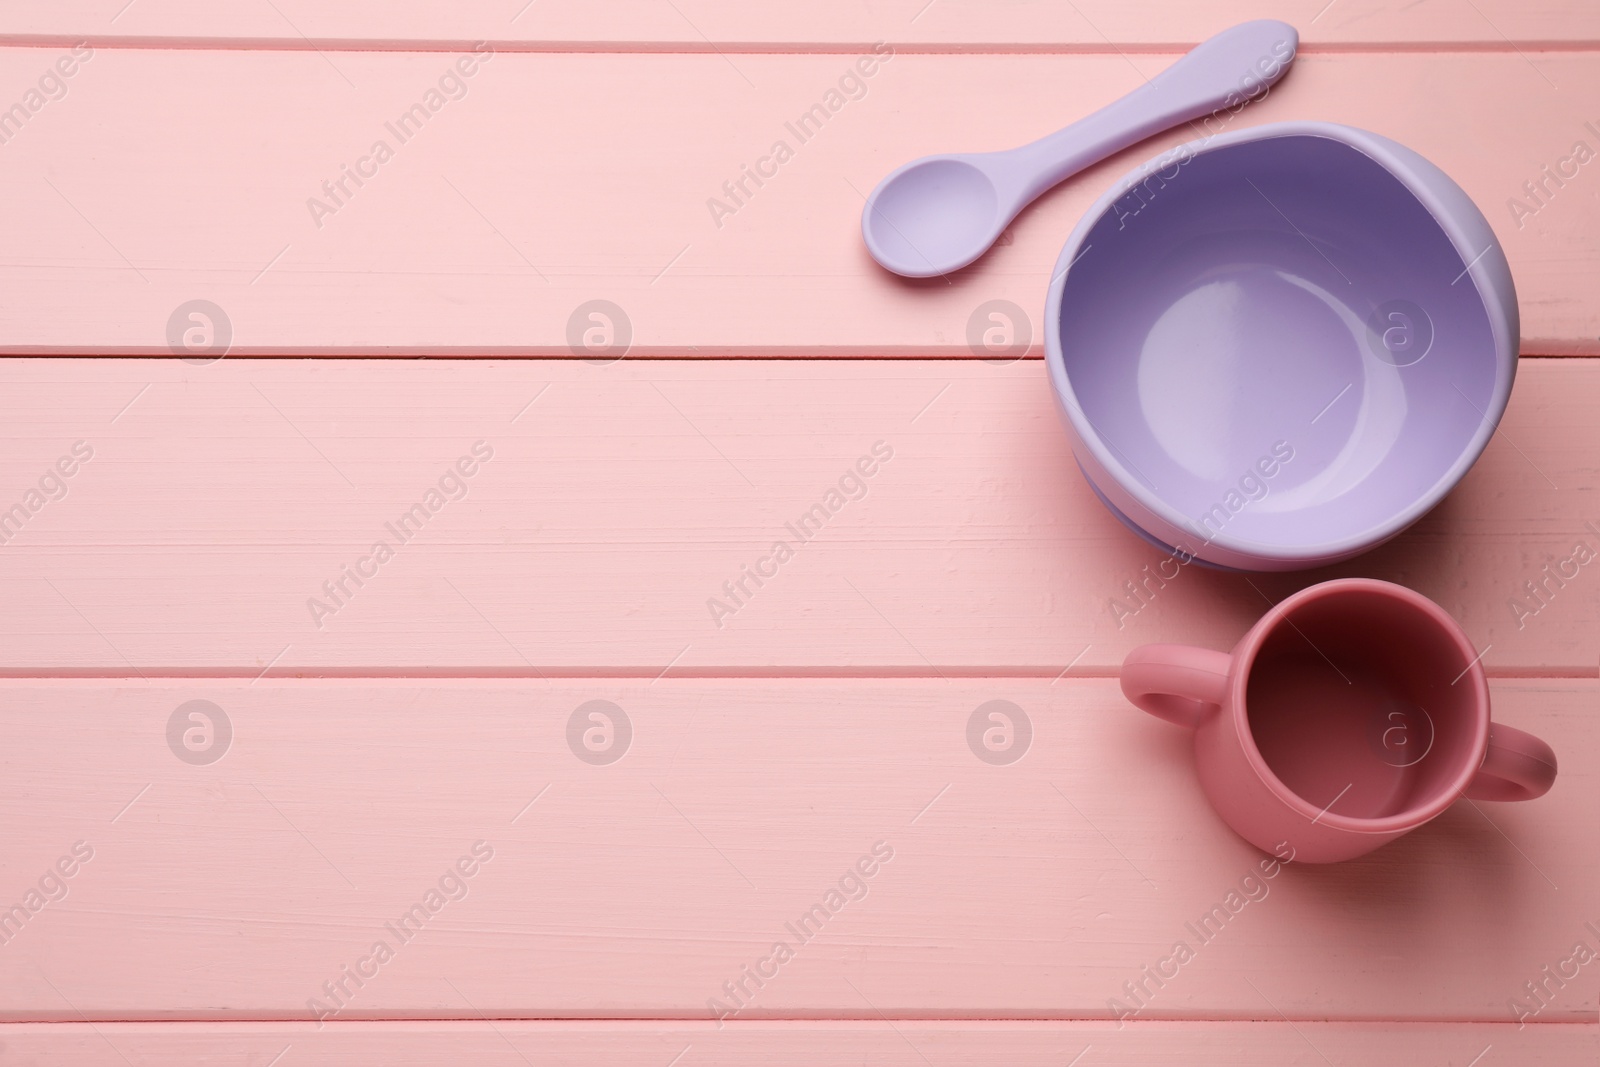 Photo of Set of plastic dishware on pink wooden background, flat lay with space for text. Serving baby food